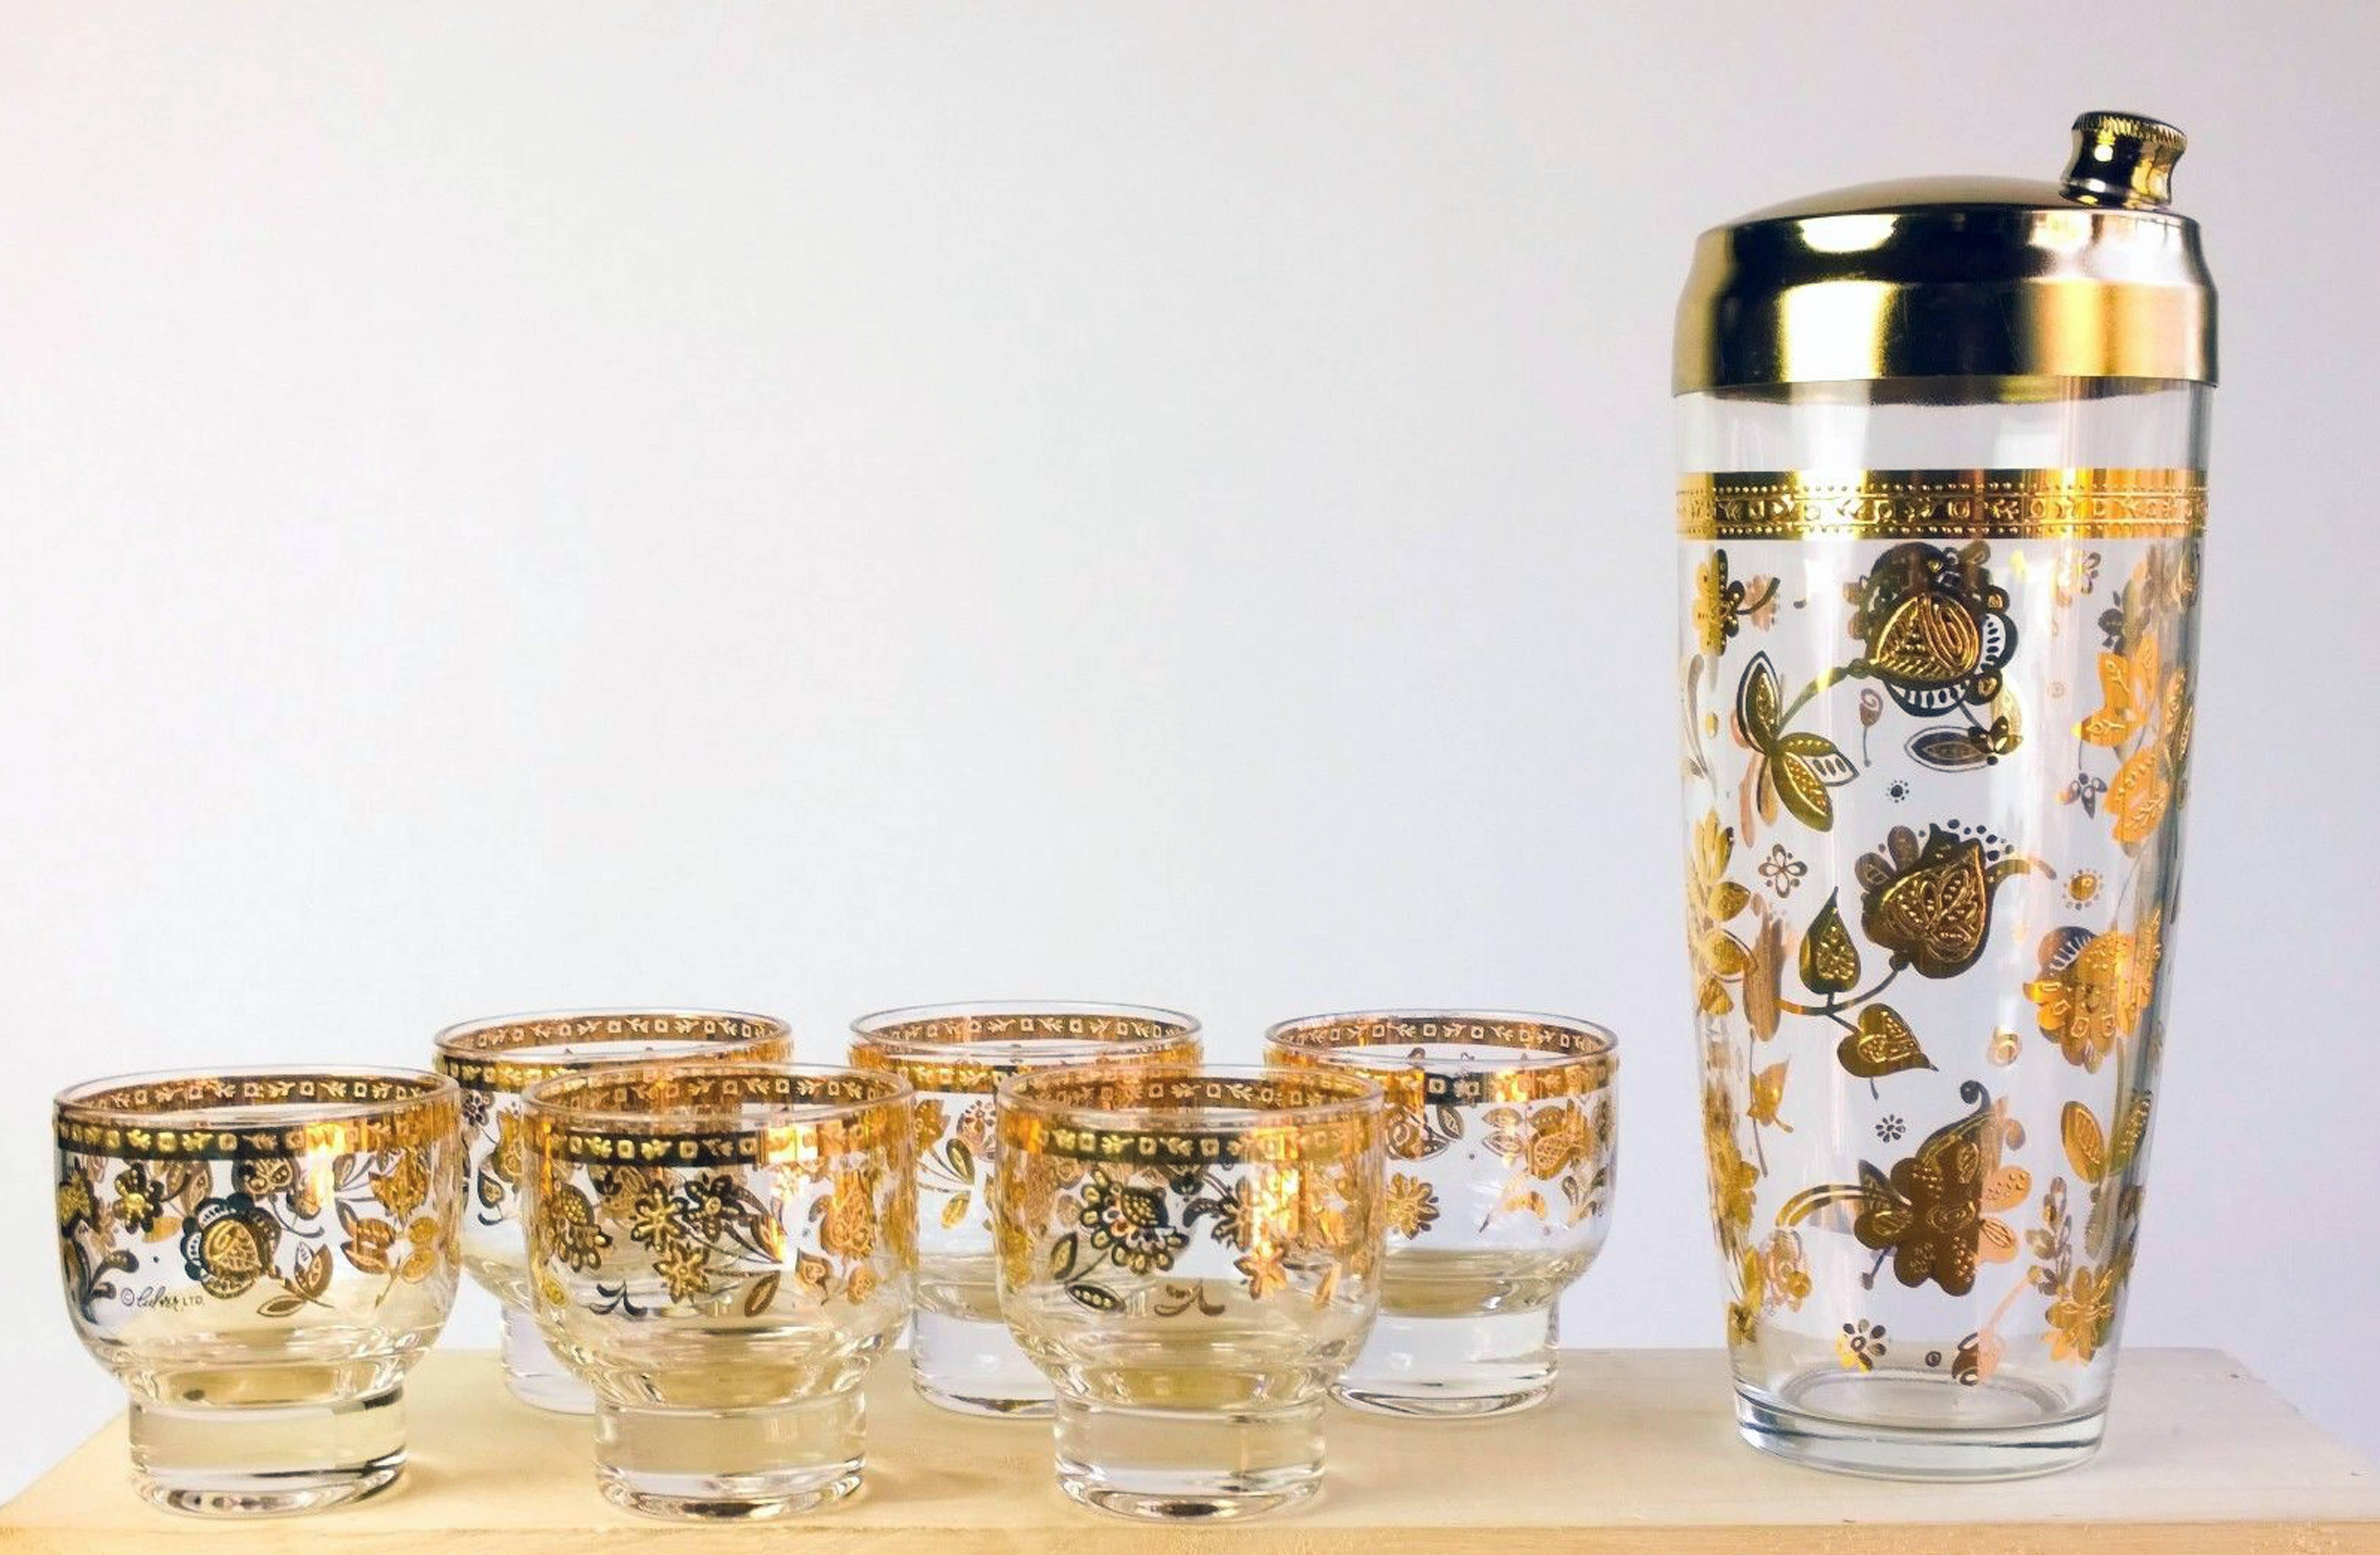 Vintage culver Chantilly pattern 40-piece glass drinks set.
1950s-early 1960s.

This fabulous large set of barware with 22-carat gold decoration is decorated in the Chantilly pattern. It is hard to find the large sets like this today. The Culver